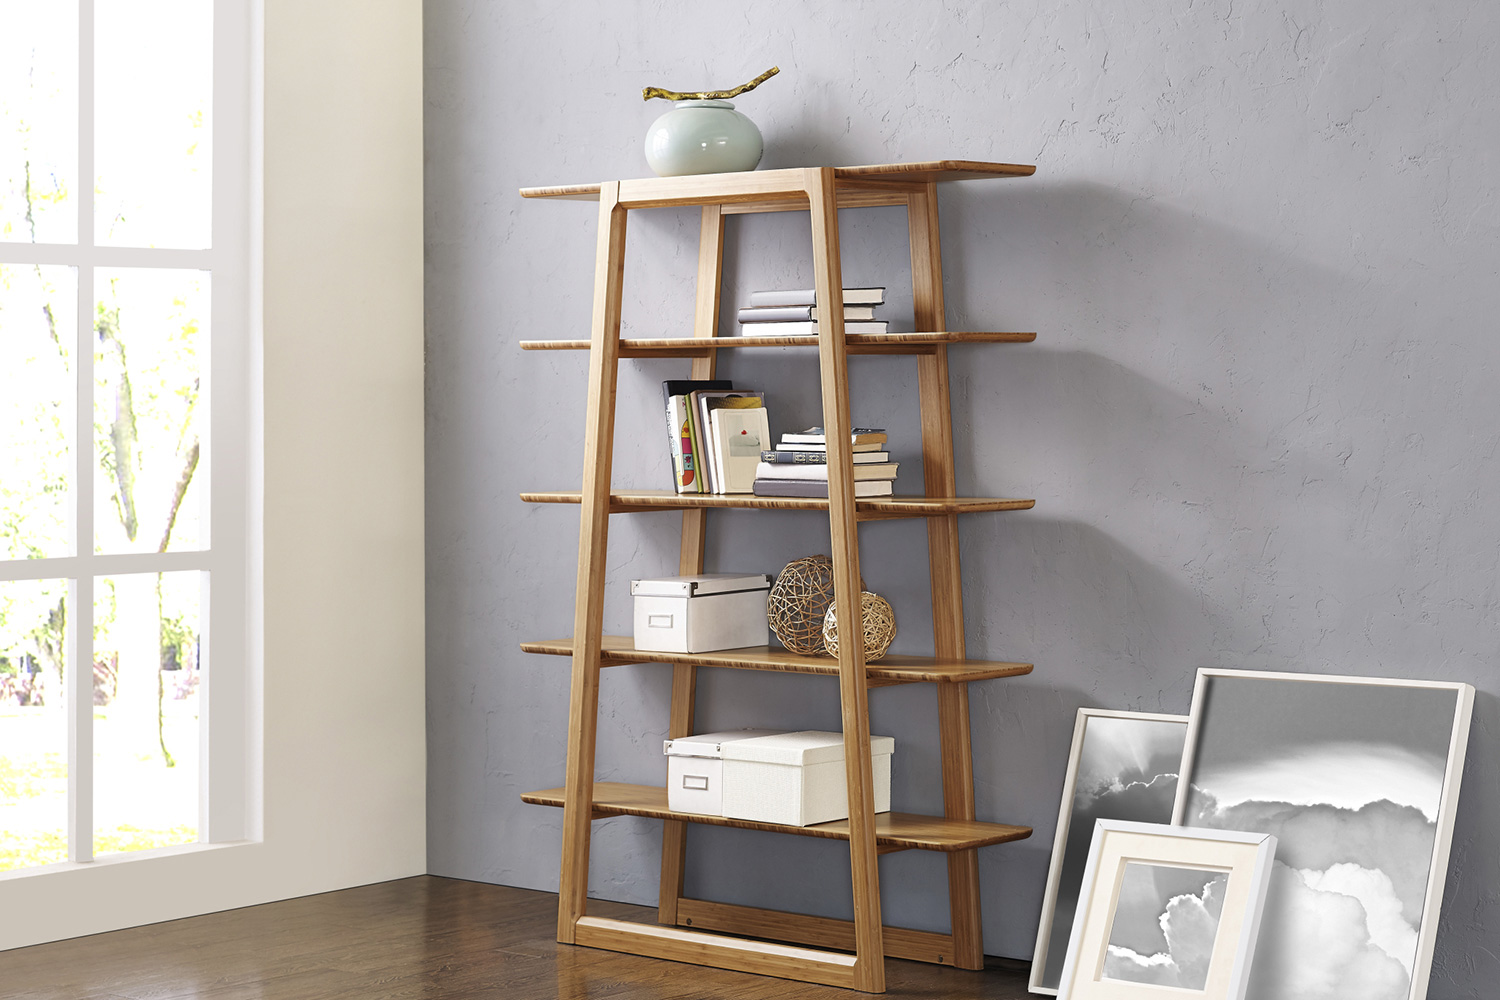 Greenington™ Currant Bookshelf - Caramelized - a roomy and convenient shelf that is suitable not only for books